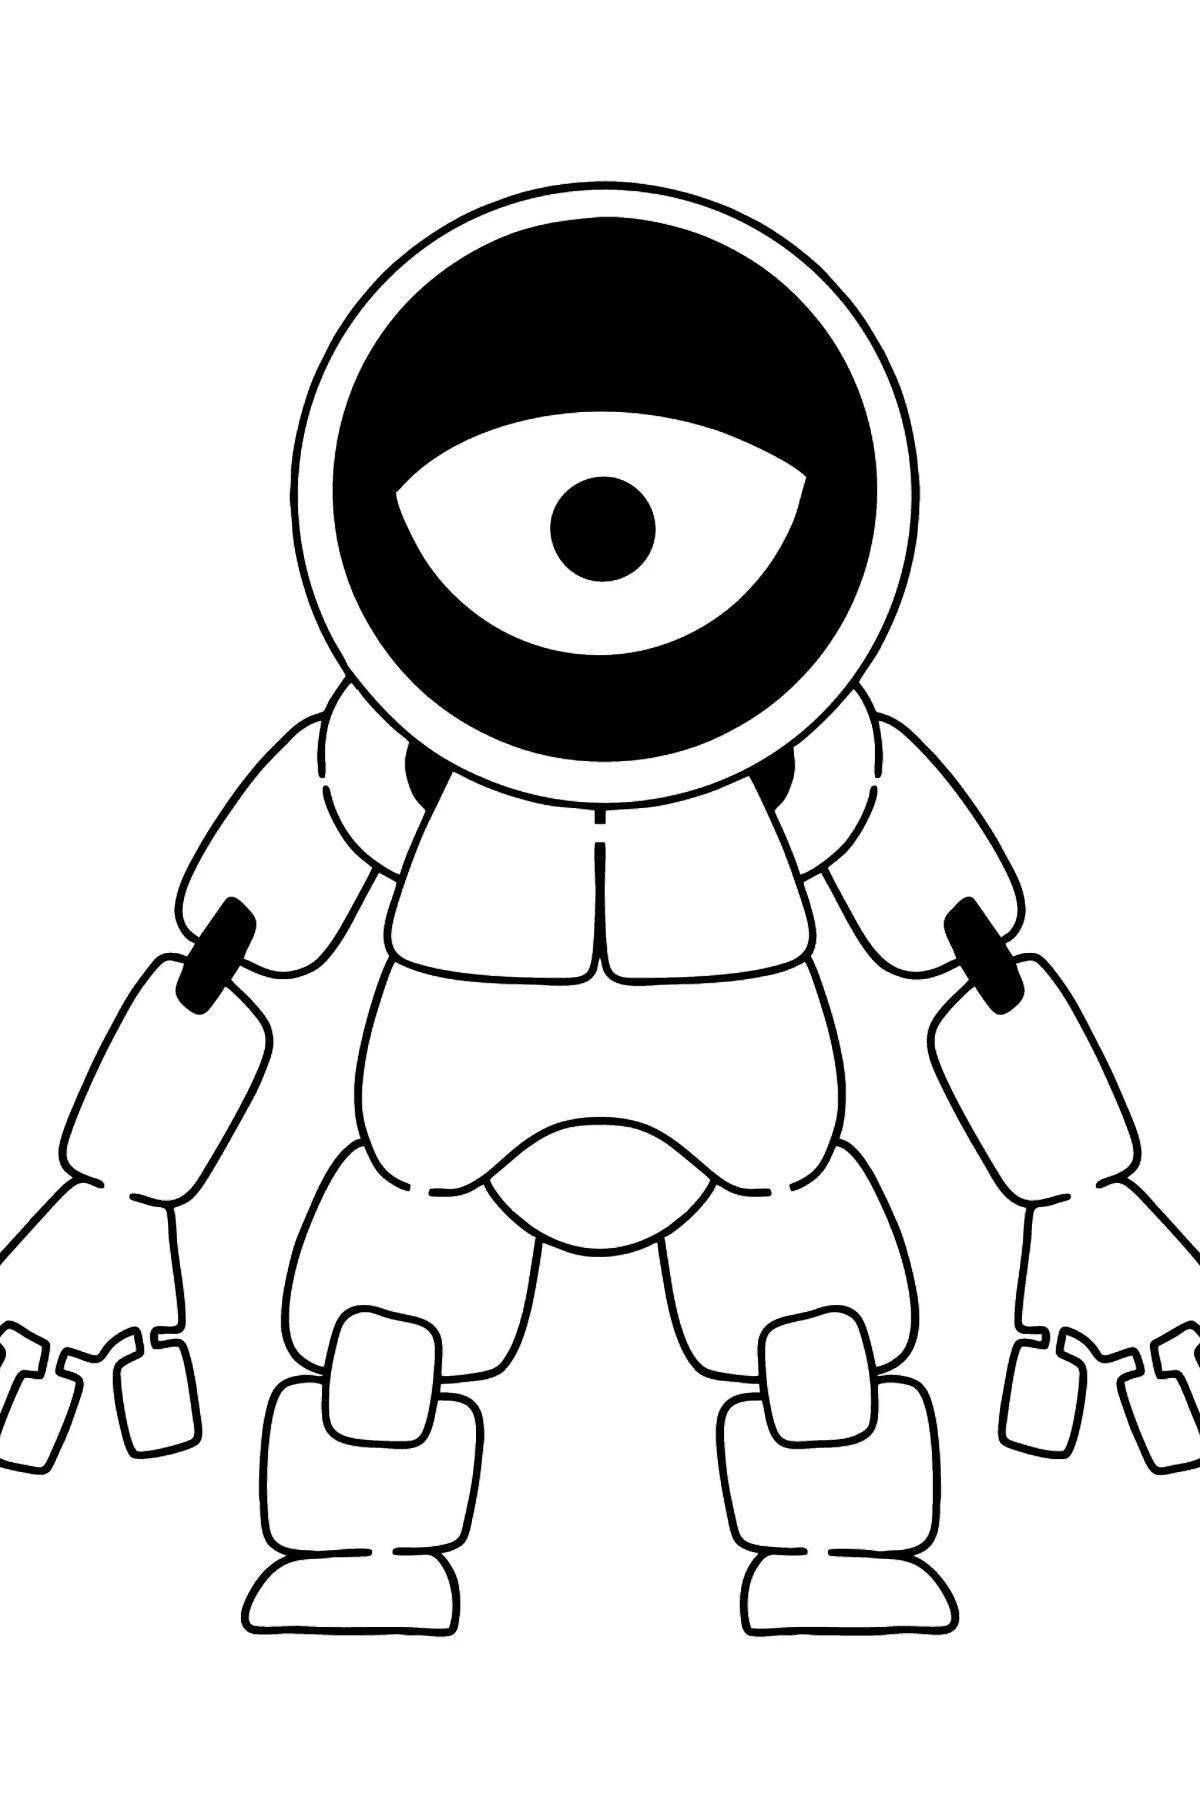 Robot by numbers #11